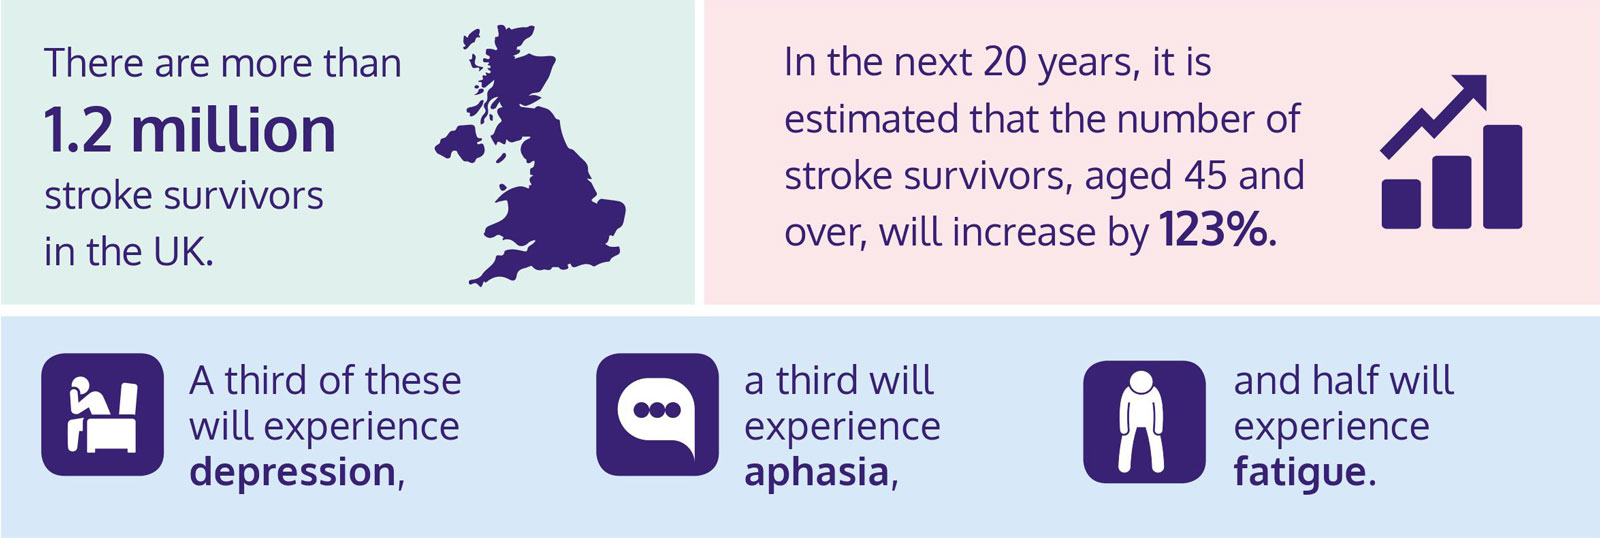 An infographic with a series of statistics:
1. There are more than 1.2 million stroke survivors in the UK.
2. In the next 20 years, it is estimated that the number of stroke survivors, aged 45 and over, will increase by 123%
3. A third of these will experience depression, a third will experience aphasia, and half will experience fatigue.